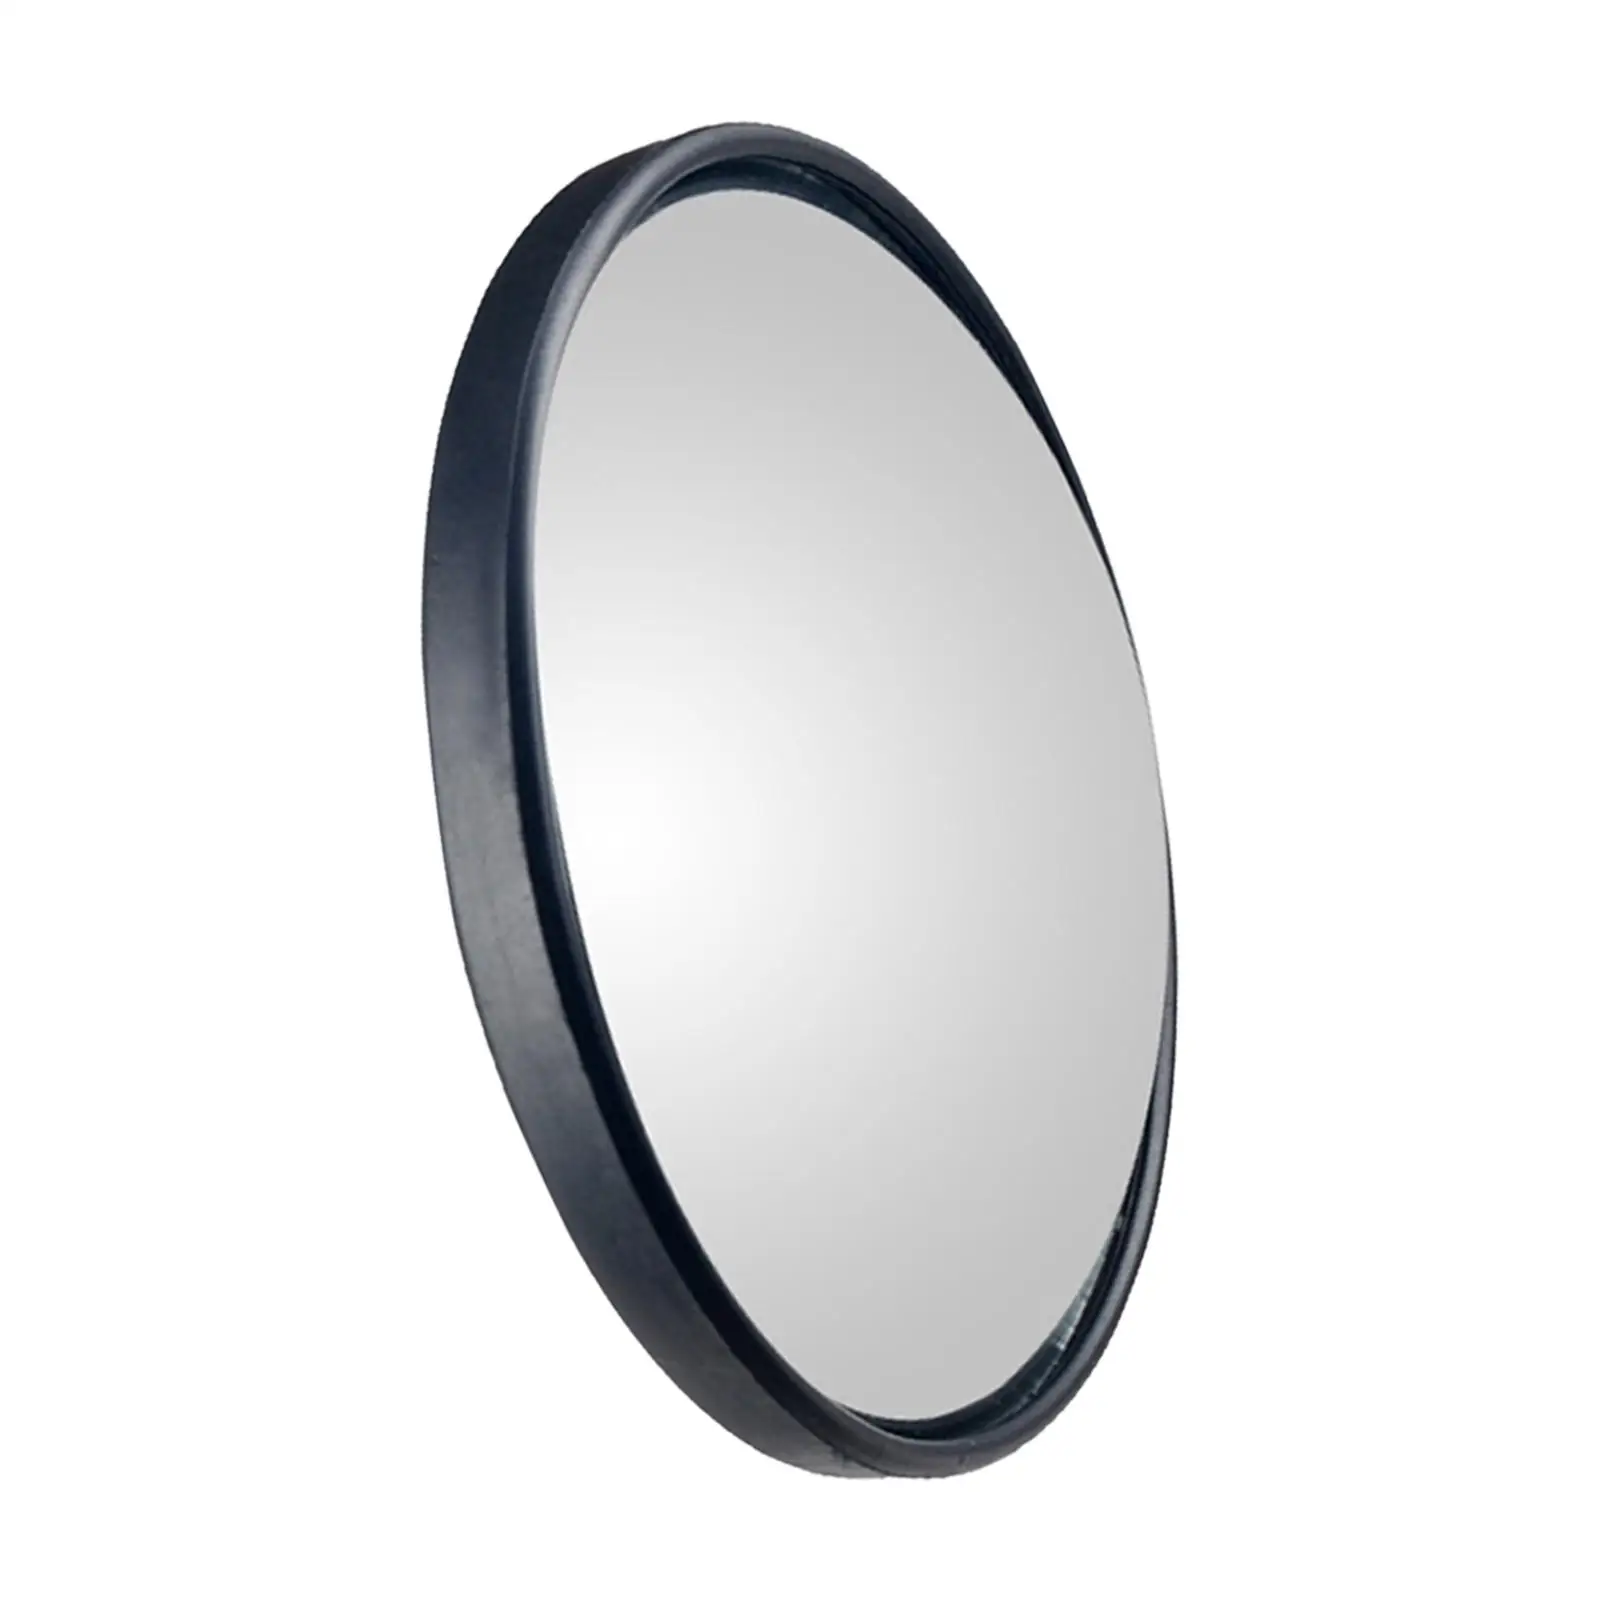 Adjustable Spot Mirrors, Car Auxiliary Accessories Large View Field Replacement Rearview Round Side Convex Mirror  Bus